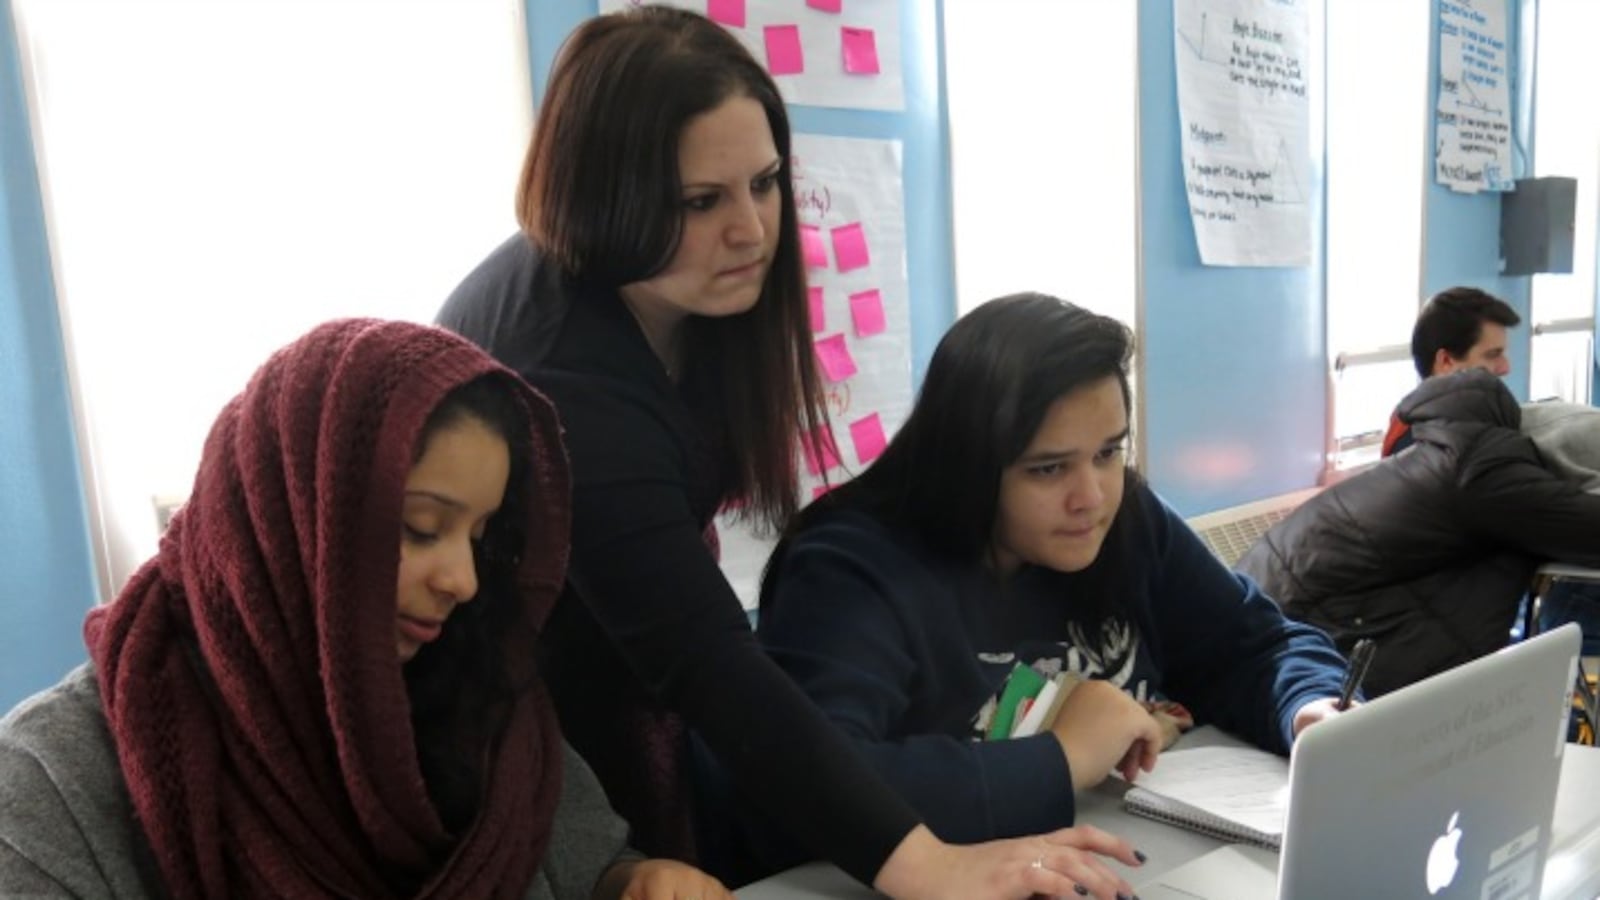 Teacher Marisa Laks, center, works with students in 2014 ahead of a Regents exam the following week.